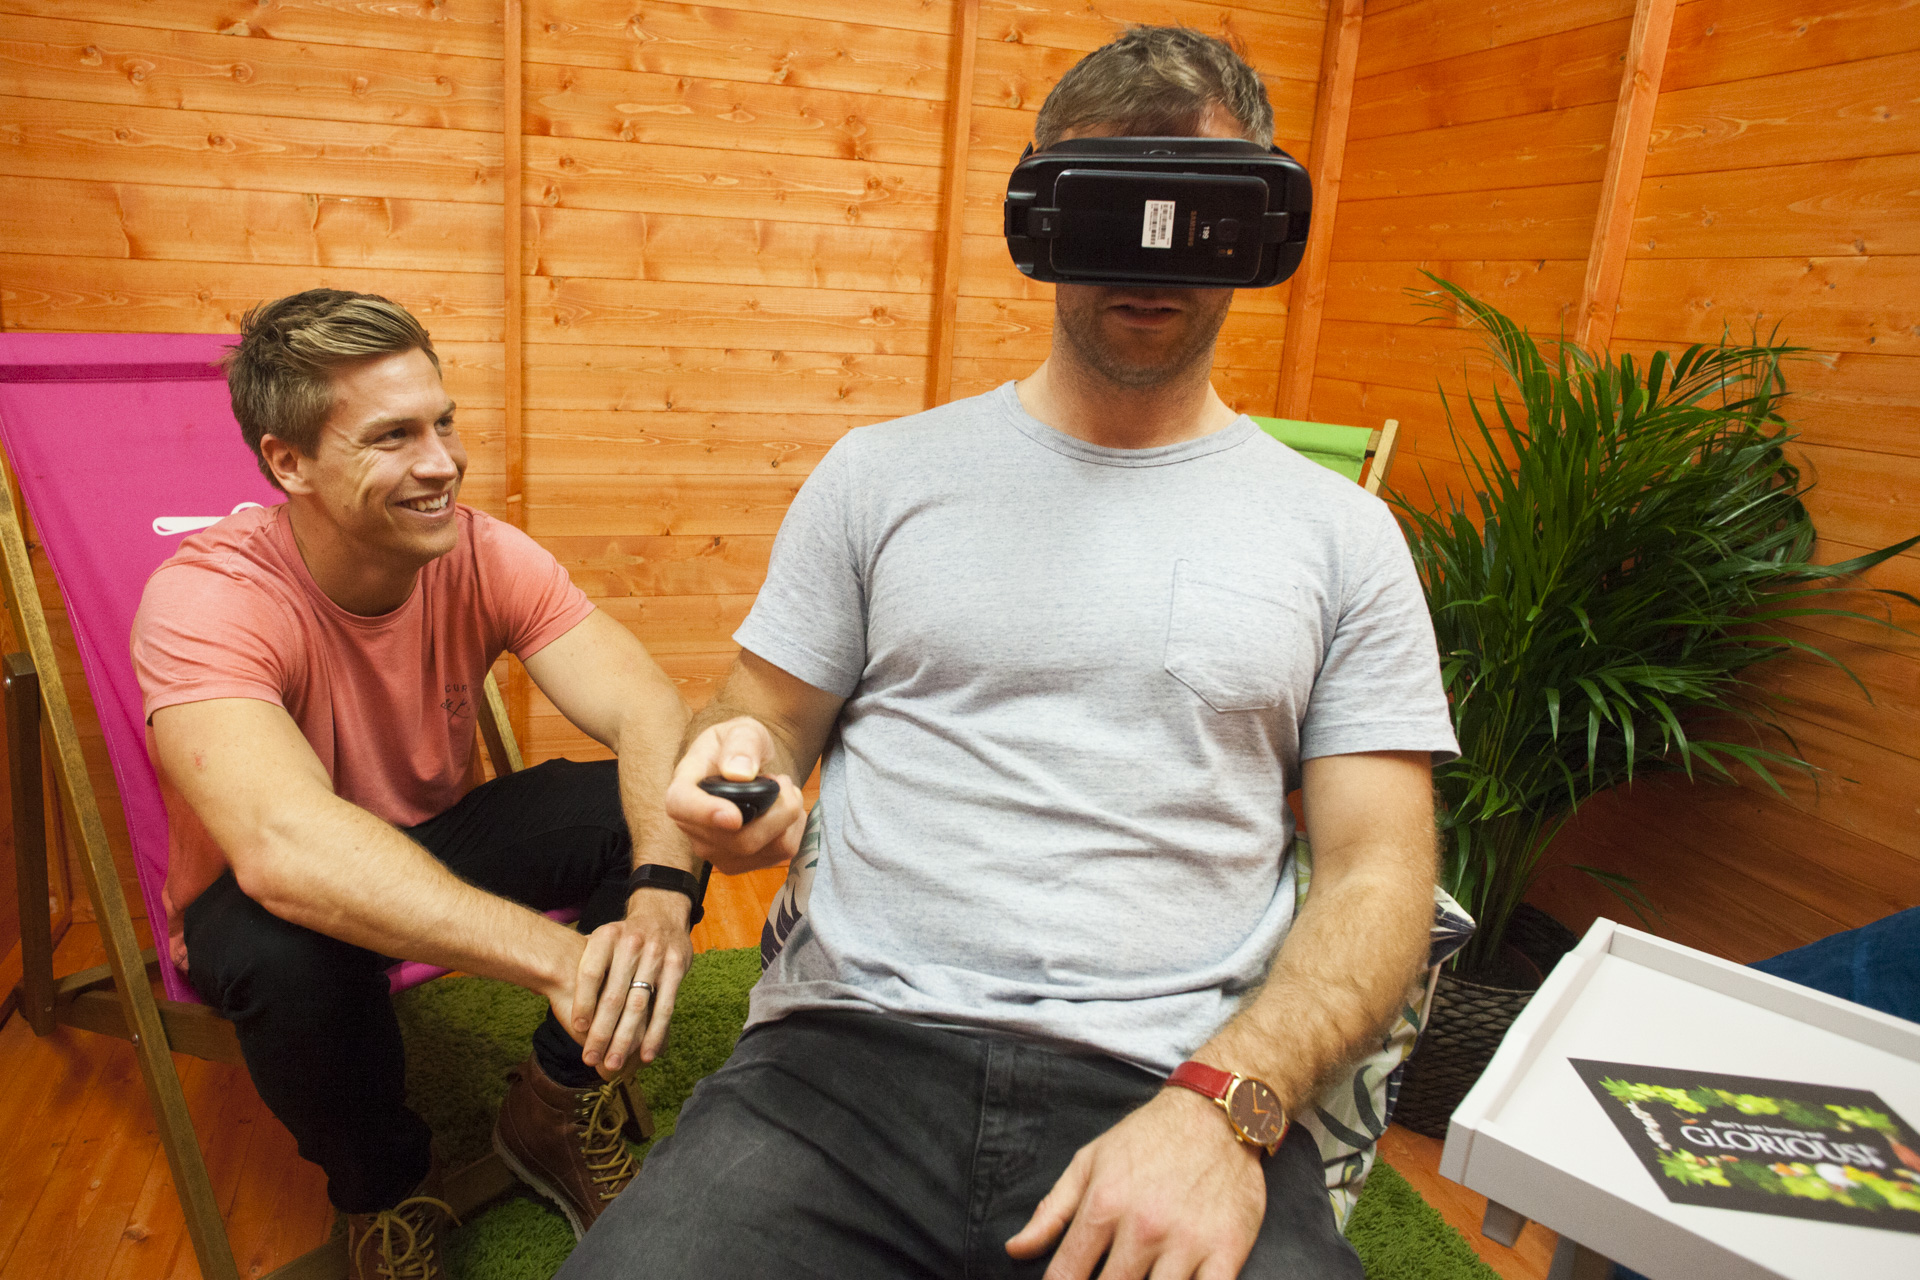 Mindful Chef boys try out GLORIOUS! Soups VR mindfulness experience in the world’s first wellness shed 1 – HIGH RES